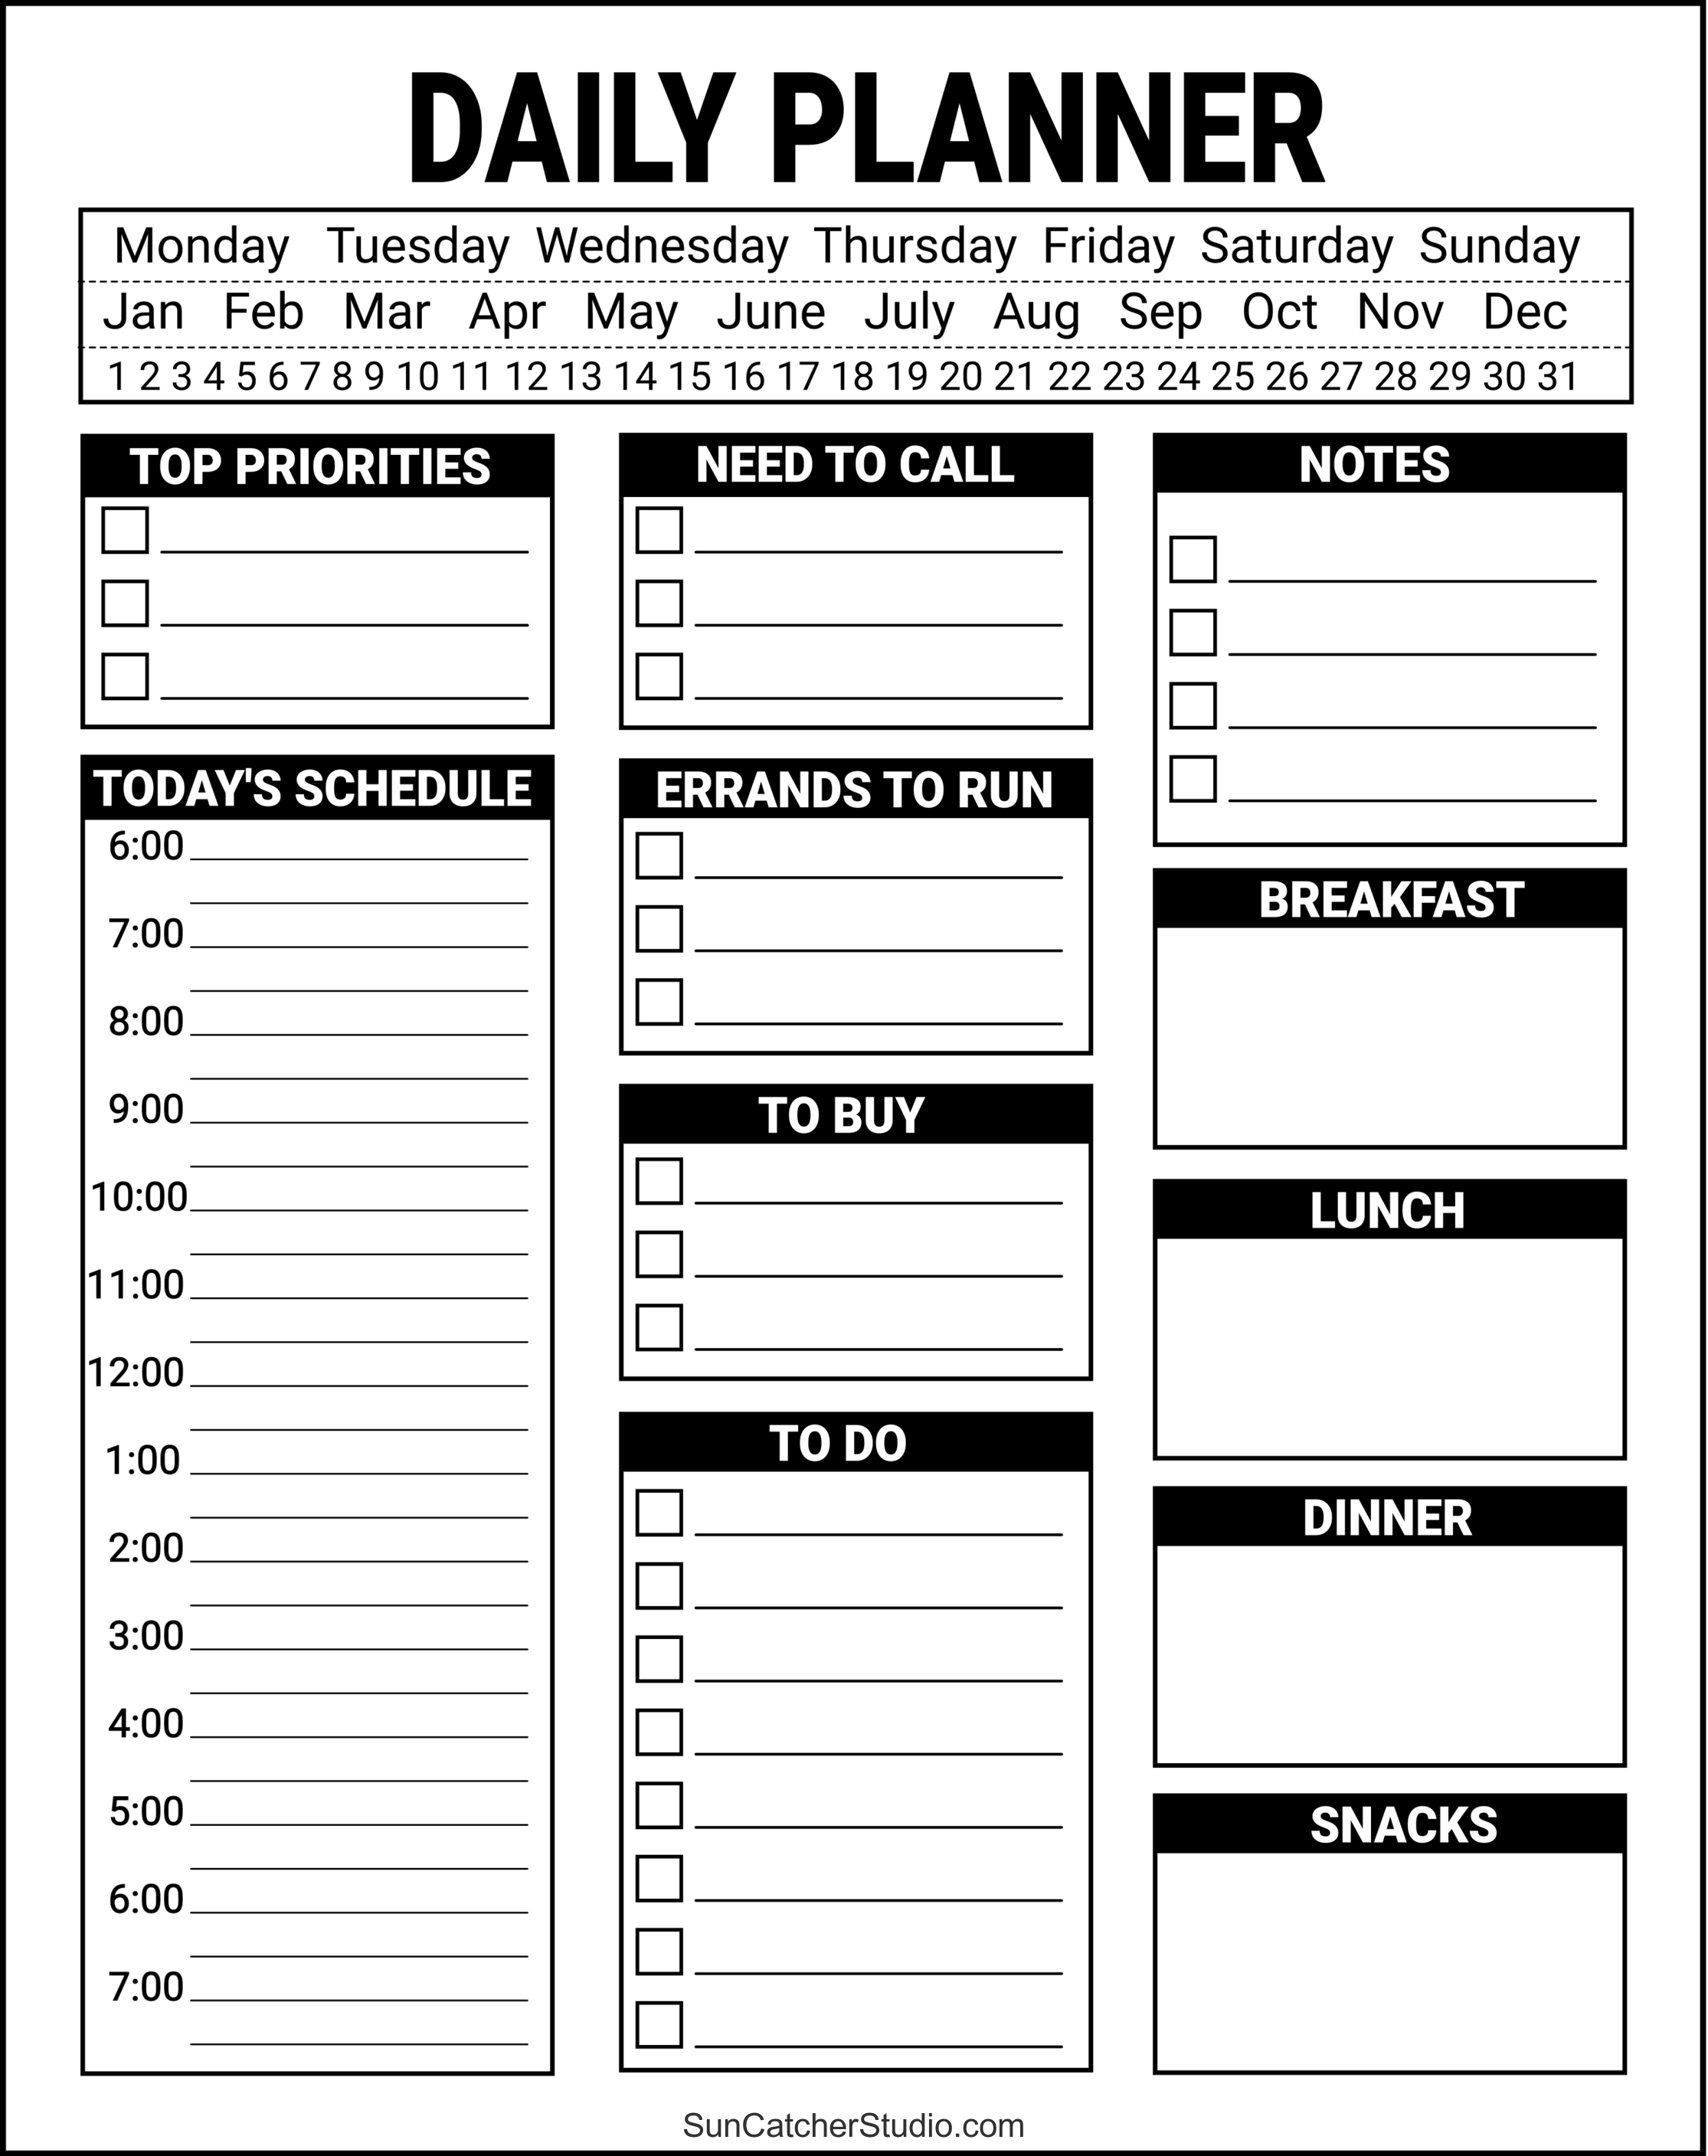 free-printable-daily-planner-templates-pdf-format-diy-projects-patterns-monograms-designs